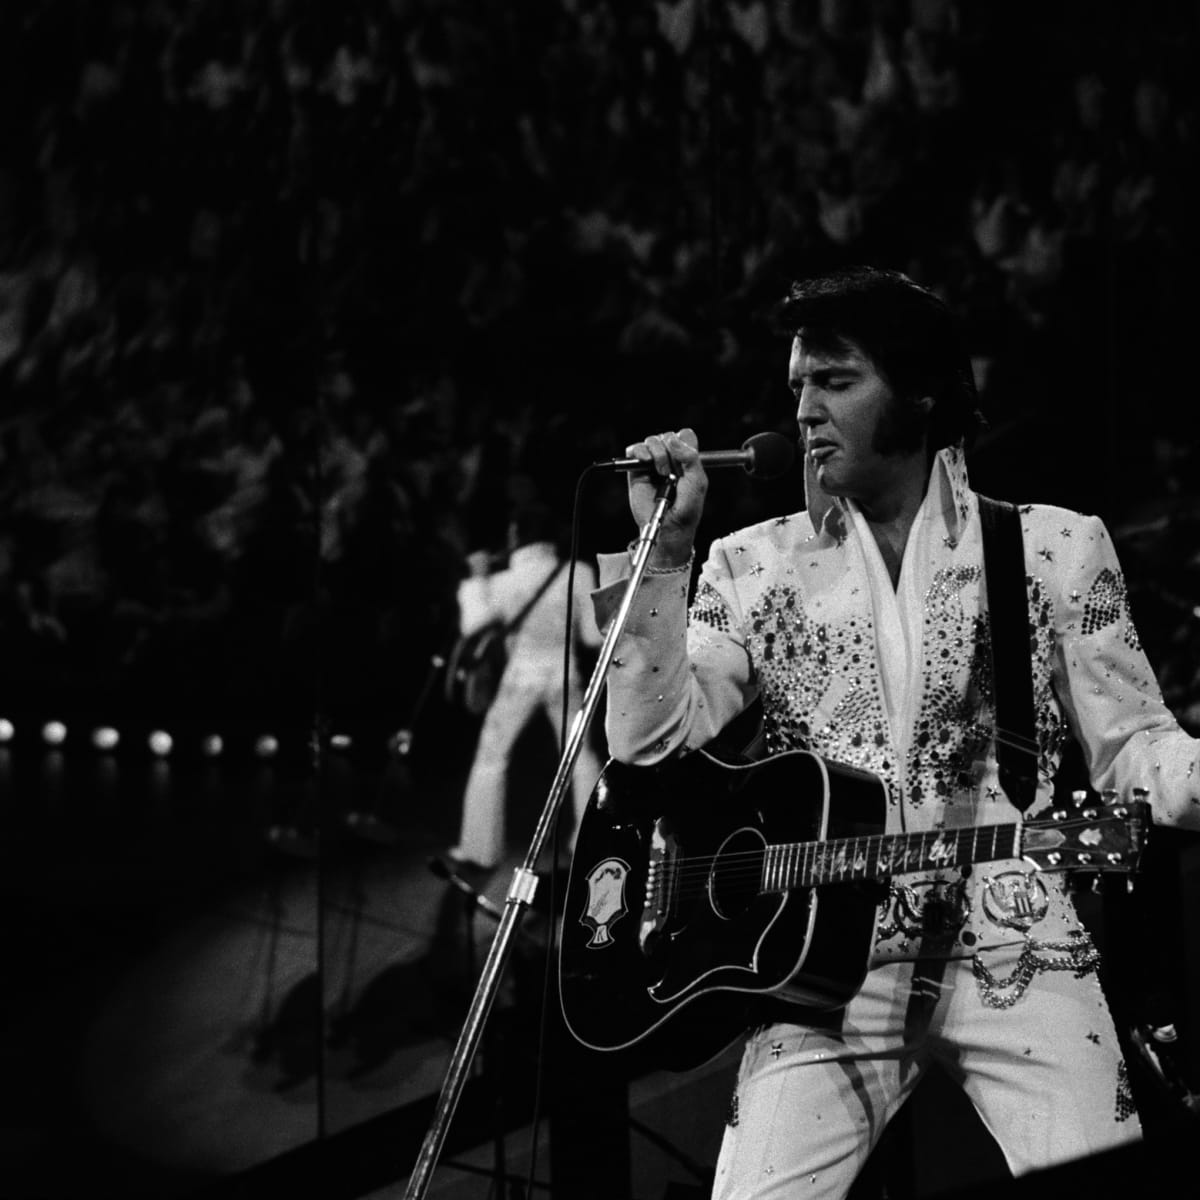 Trouble — Elvis Presley relaunched his career with his hit from 1958